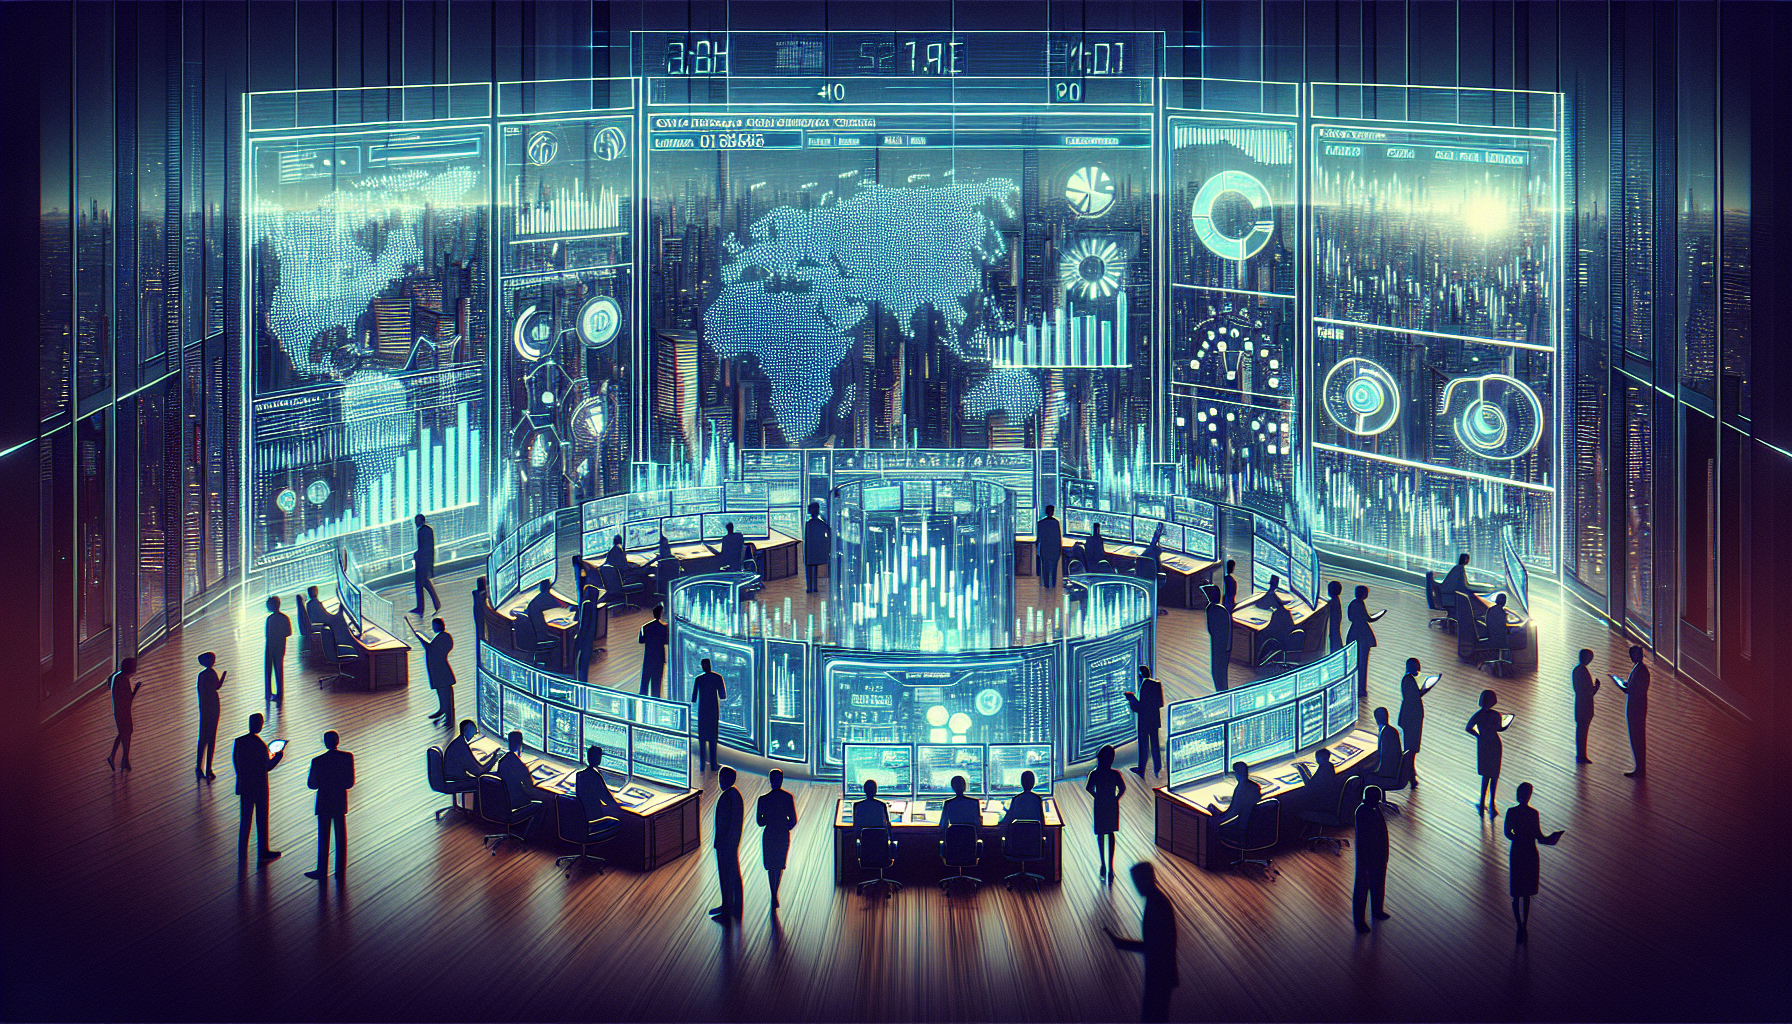 A high-resolution digital illustration depicting a futuristic trading room filled with holographic screens displaying various financial data, low margins, and futures trading charts. In the center, a diverse group of traders, including both beginners and experts, engage with cutting-edge technology. The overall ambiance is cost-effective and efficient, reflecting a modern, streamlined brokerage service. The background shows cityscapes with towering skyscrapers to signify global financial markets.